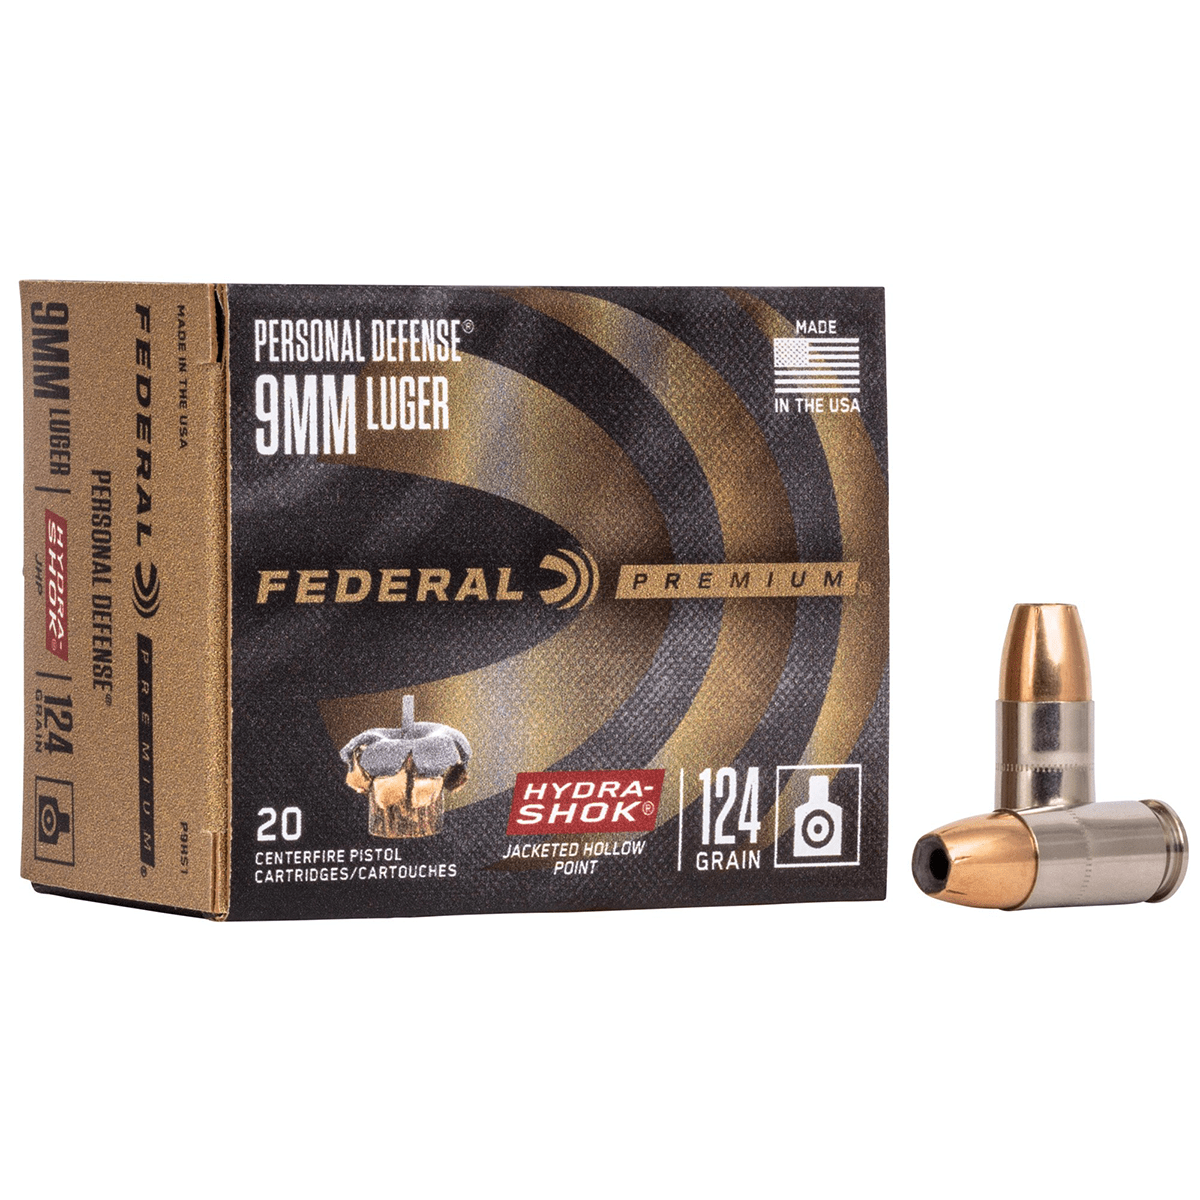 Federal Premium Personal Defense 9mm Luger 124 grain Hydra-Shok Jacketed Hollow Point Ammo